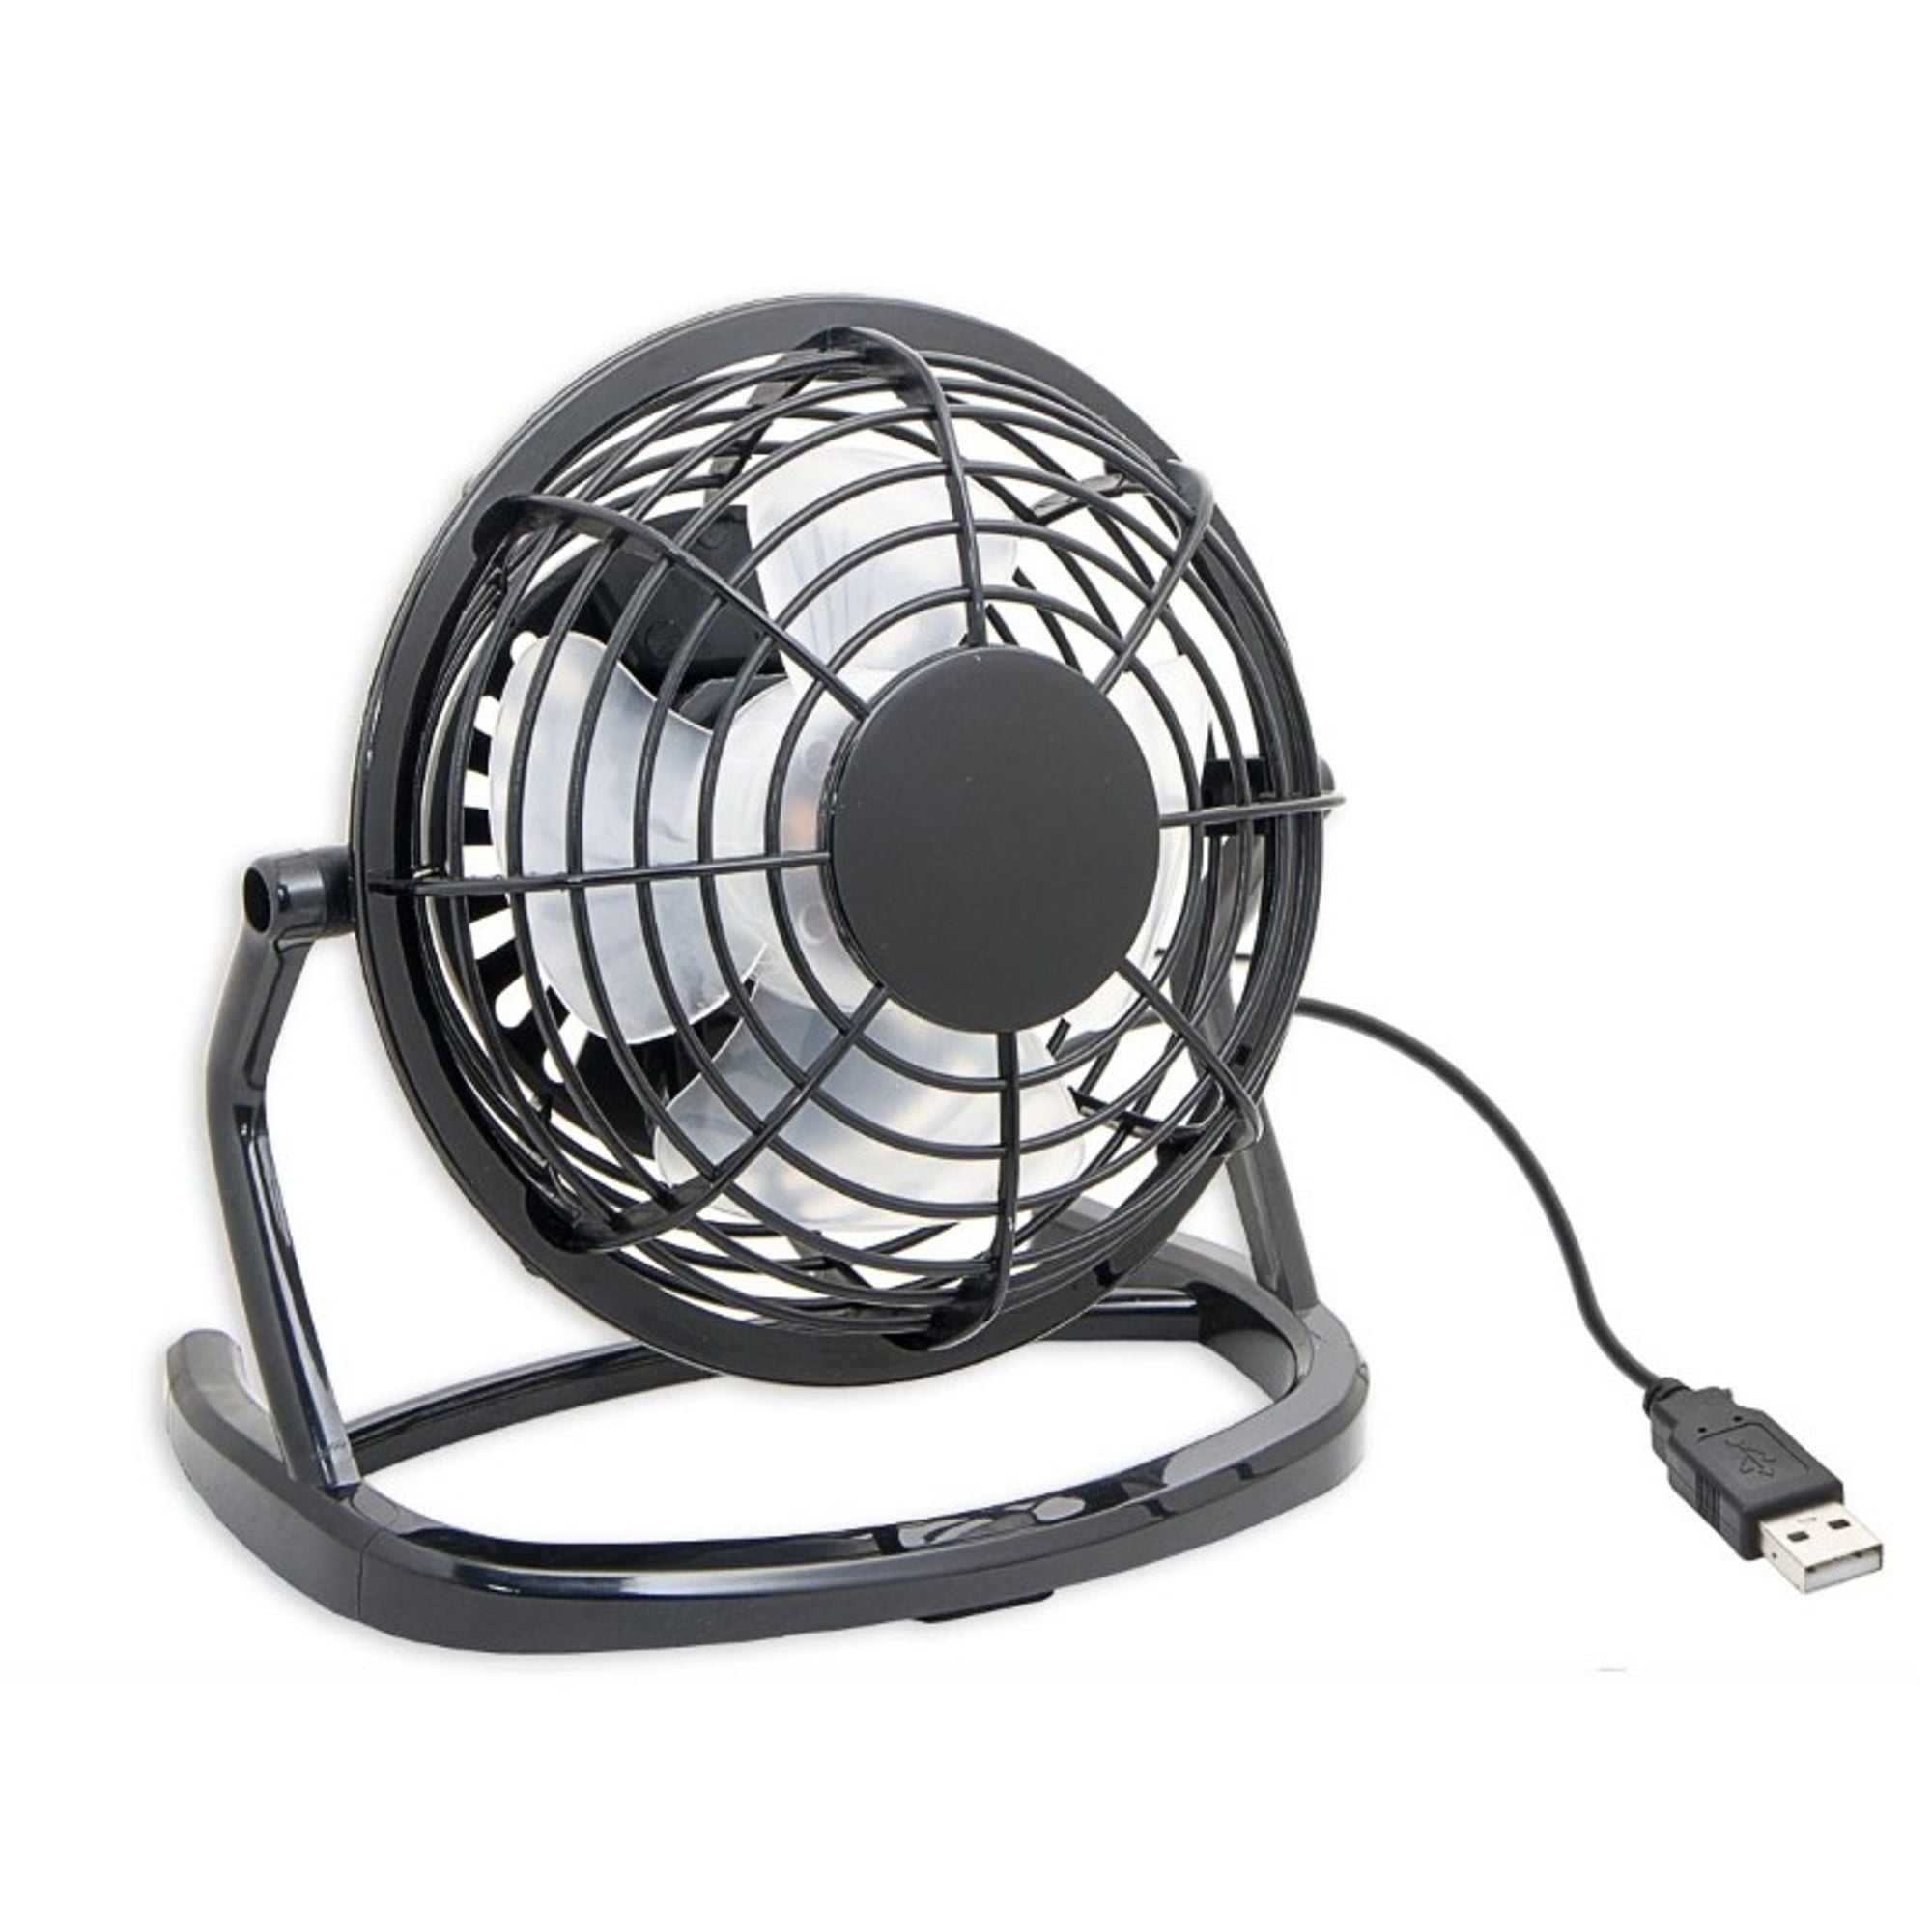 USB Desk Fan,EasyAcc 4 Inch Mini USB Table Fan Electric 4 Blades Portable Personal Fan with 360°Rotation and Adjustable Angle Cooling Floor Fan Fit All USB Device for Office Home Desktop Table Black